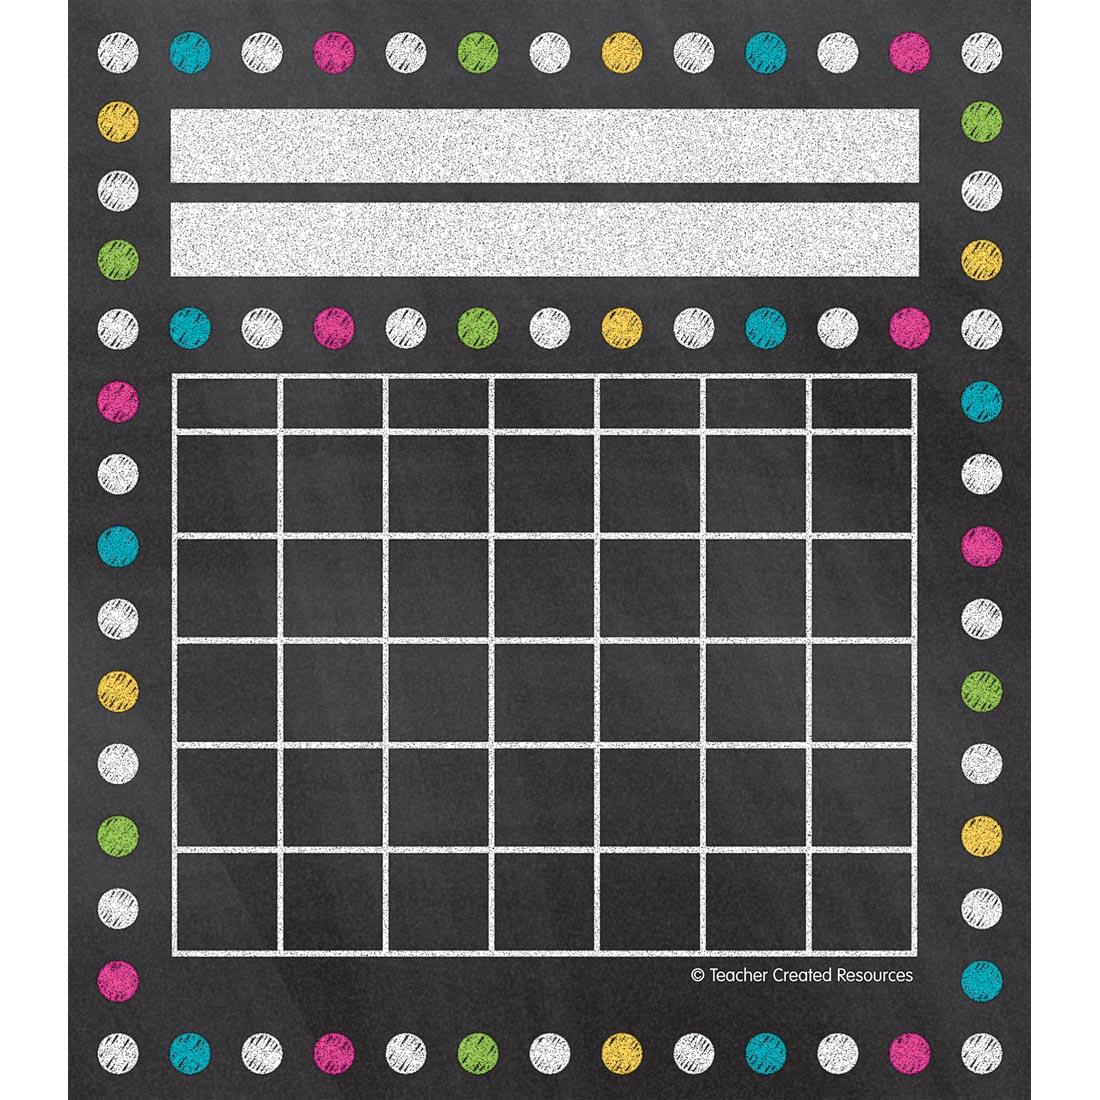 Student Incentive Chart from the Chalkboard Brights collection by Teacher Created Resources